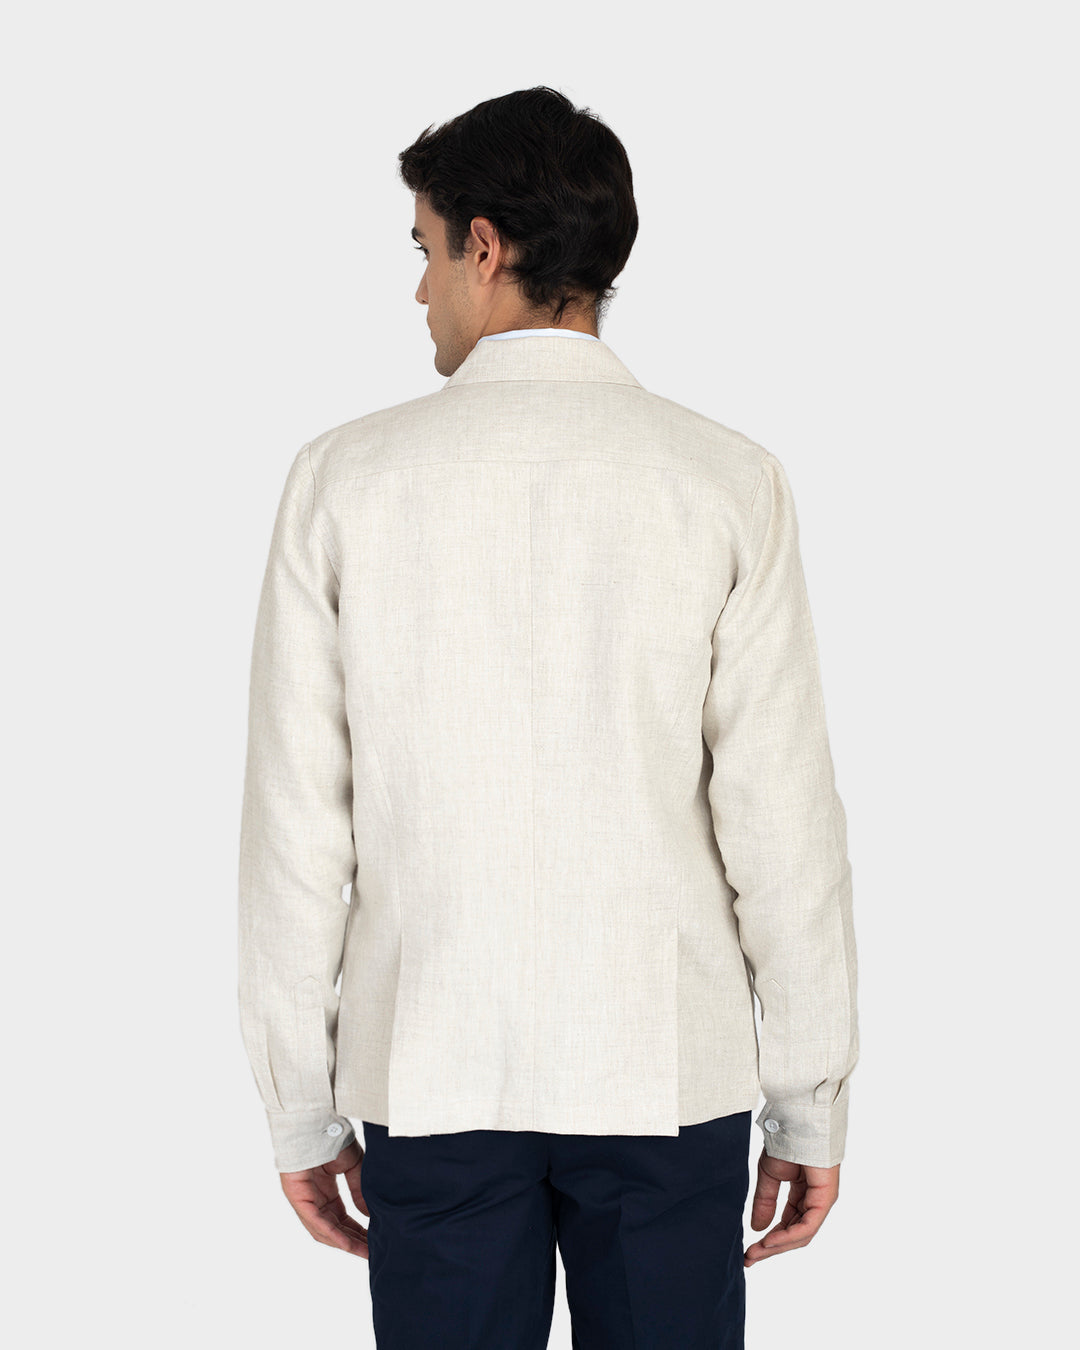 Back of model wearing the muslin shirt jacket for men by Luxire